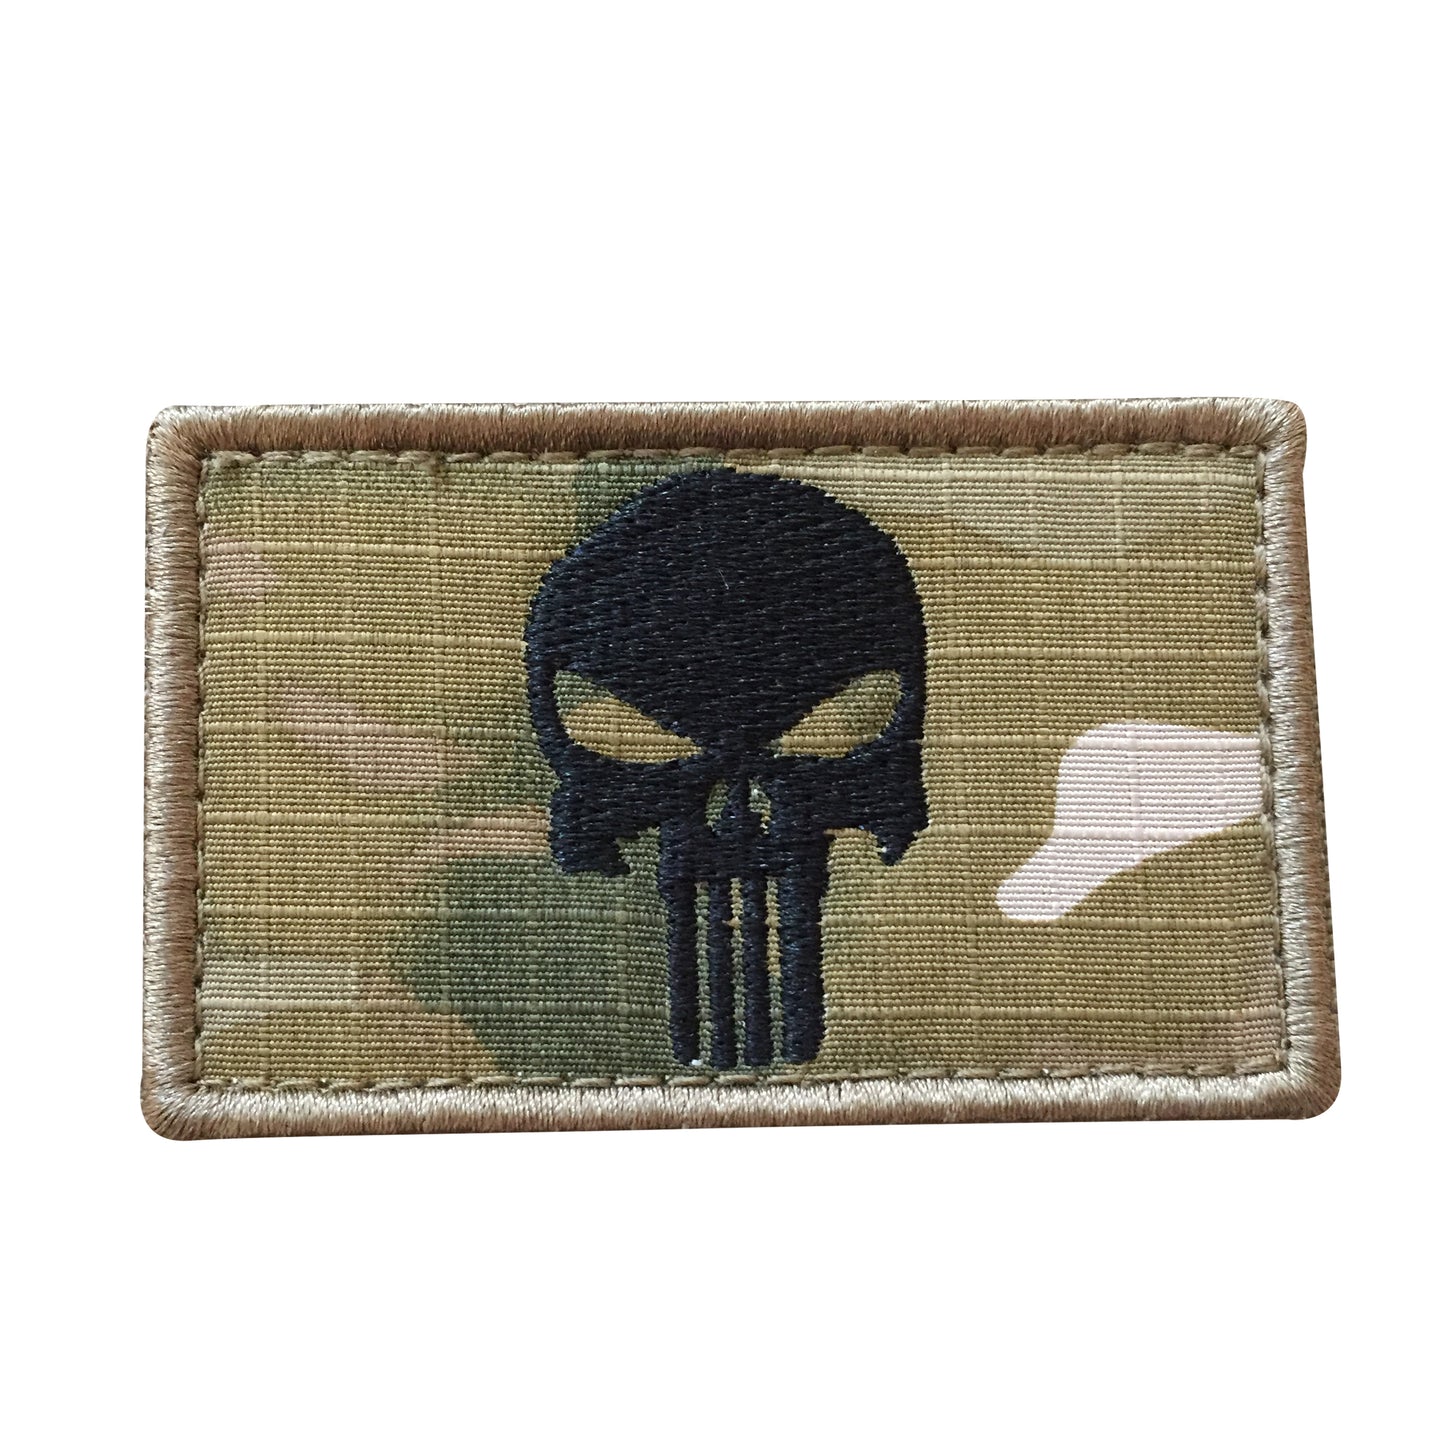 E-ZYT-L - Embroidery Rectangle Punisher Flag Patch Multicam